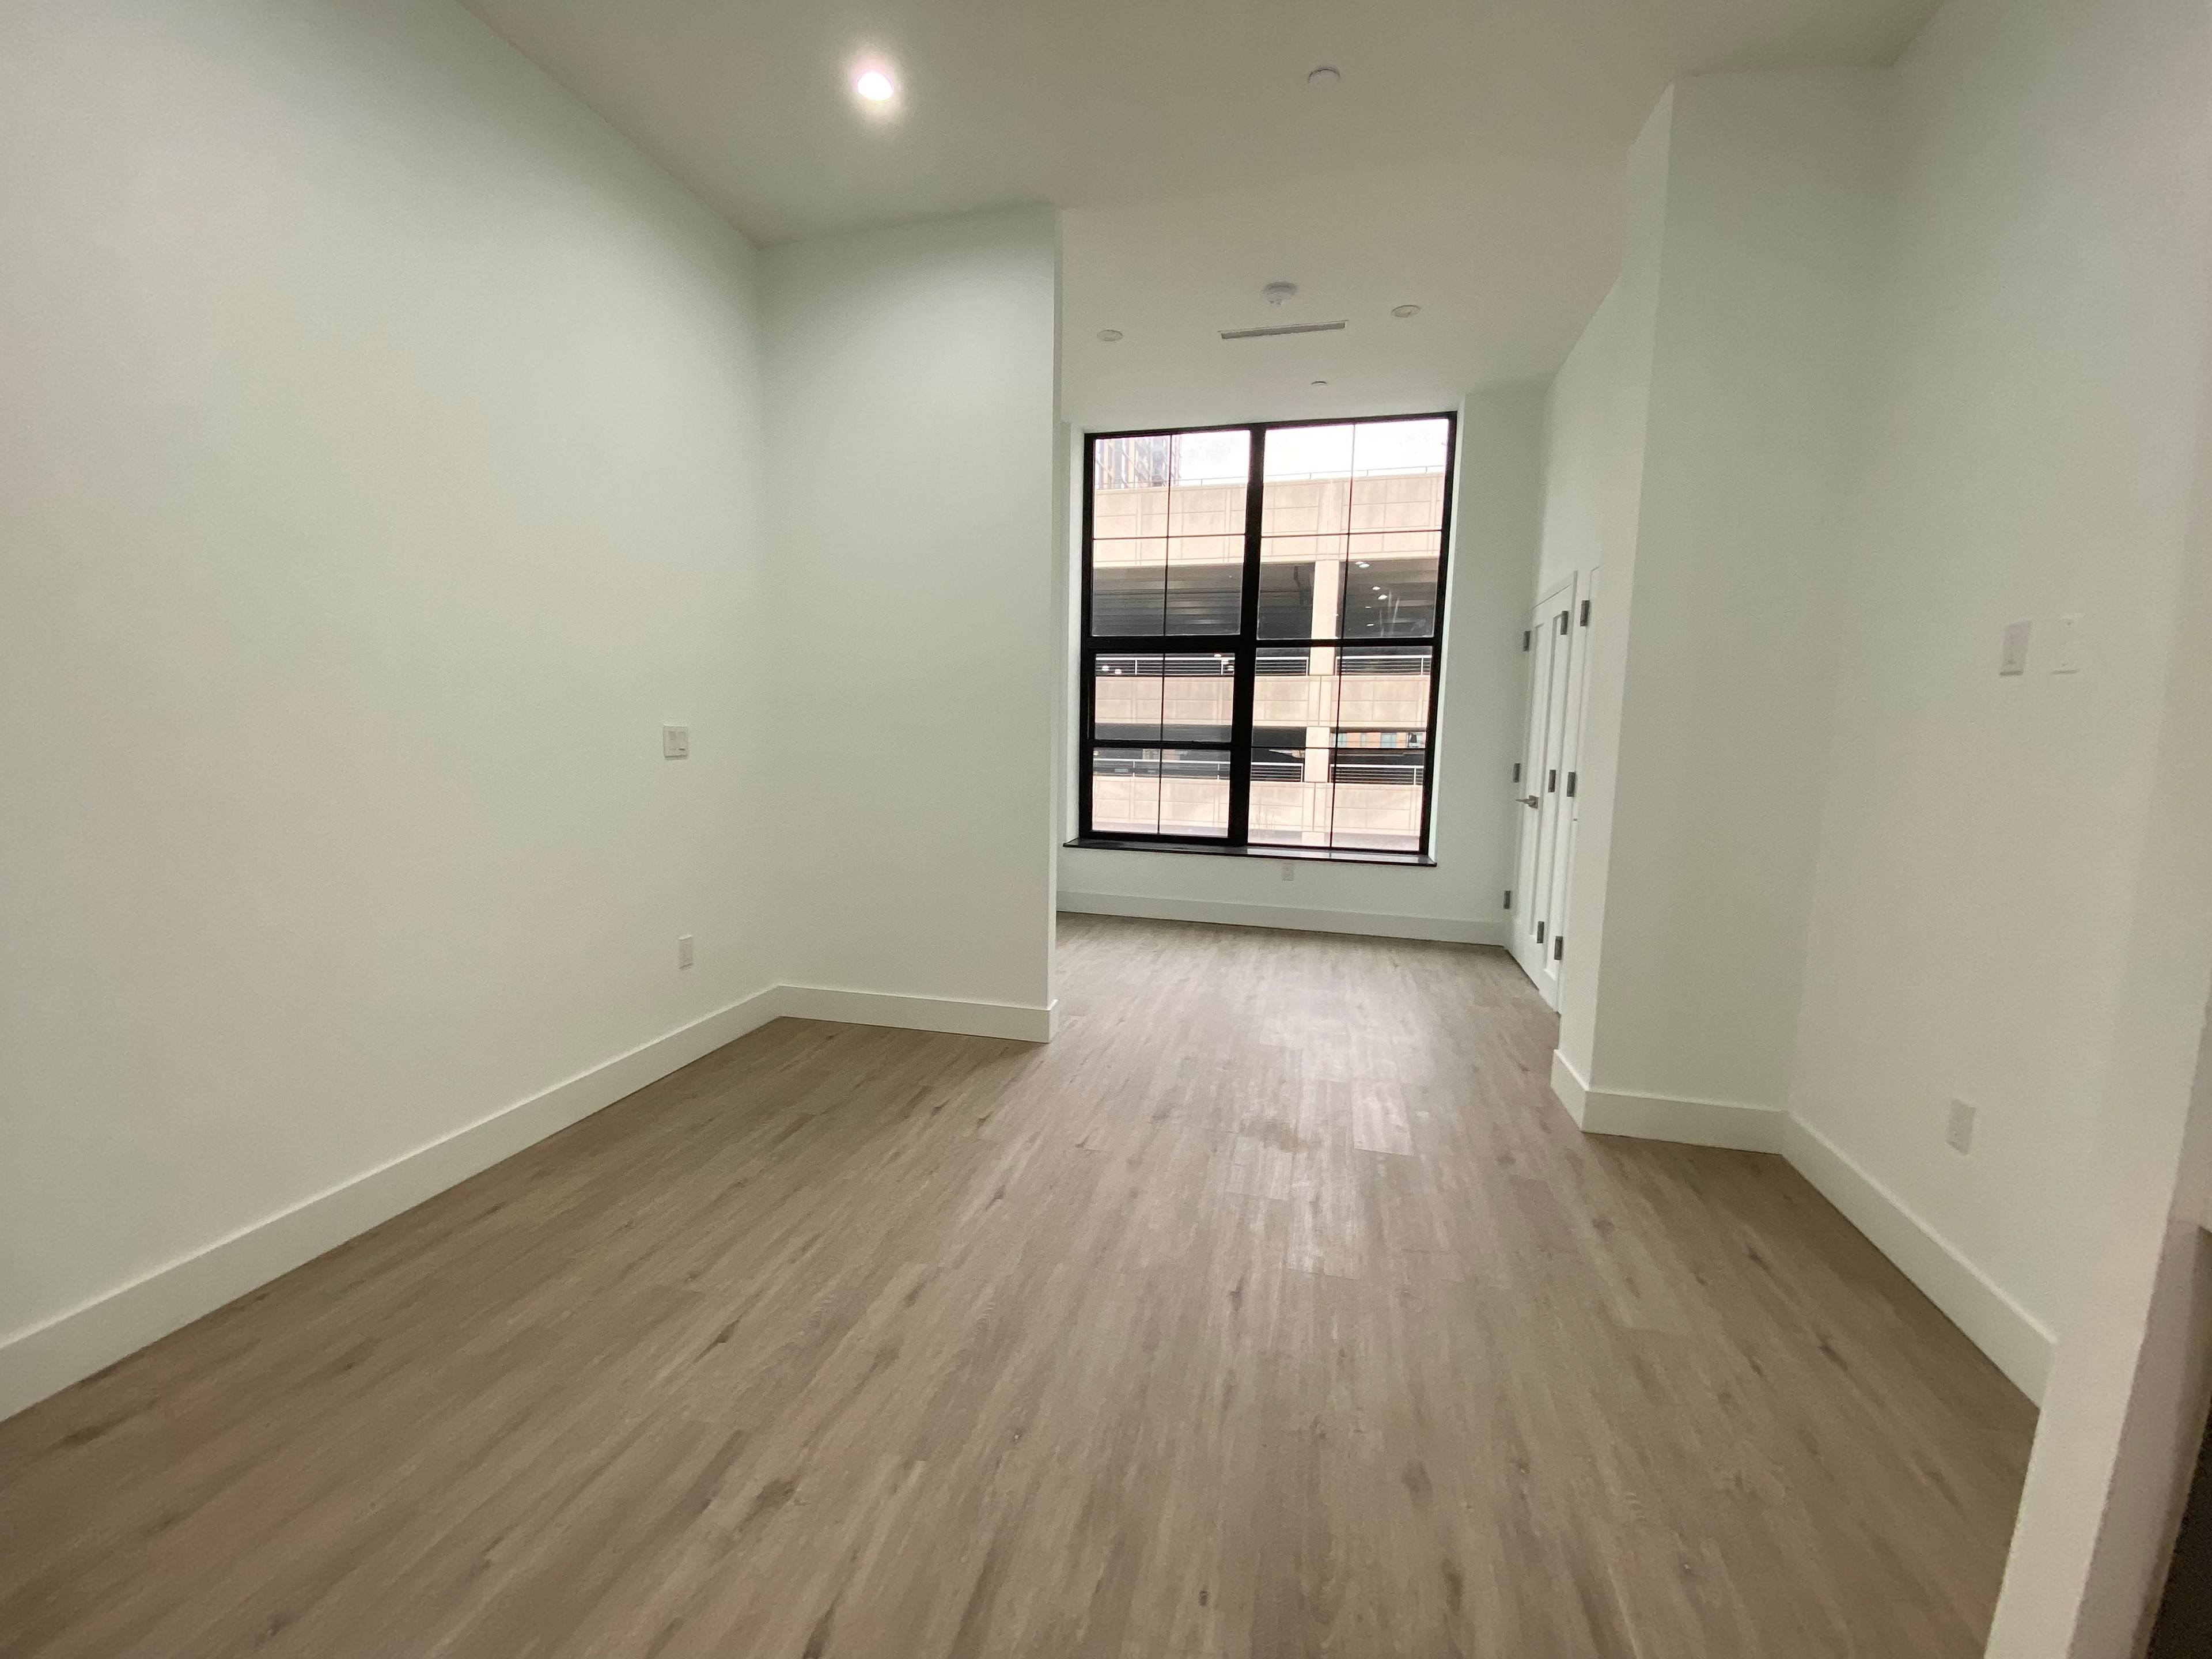 BRAND NEW HUNTERS POINT WATERFRONT, LOFT STYLE RENTAL BUILDING!